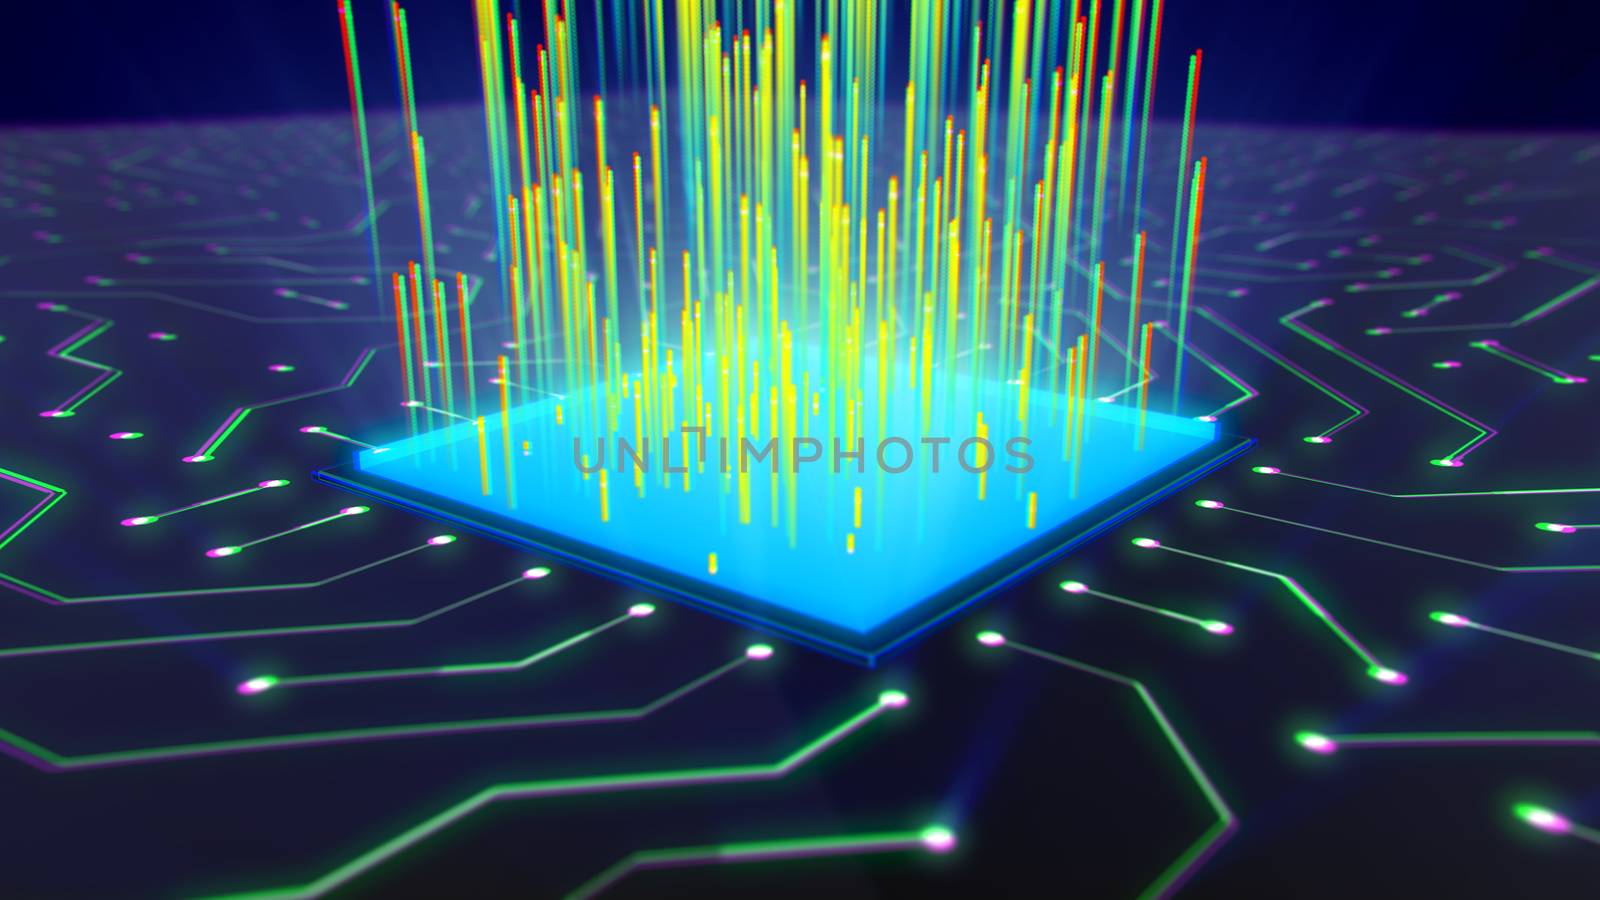 Microchip Power and Energy Holographic Image by klss